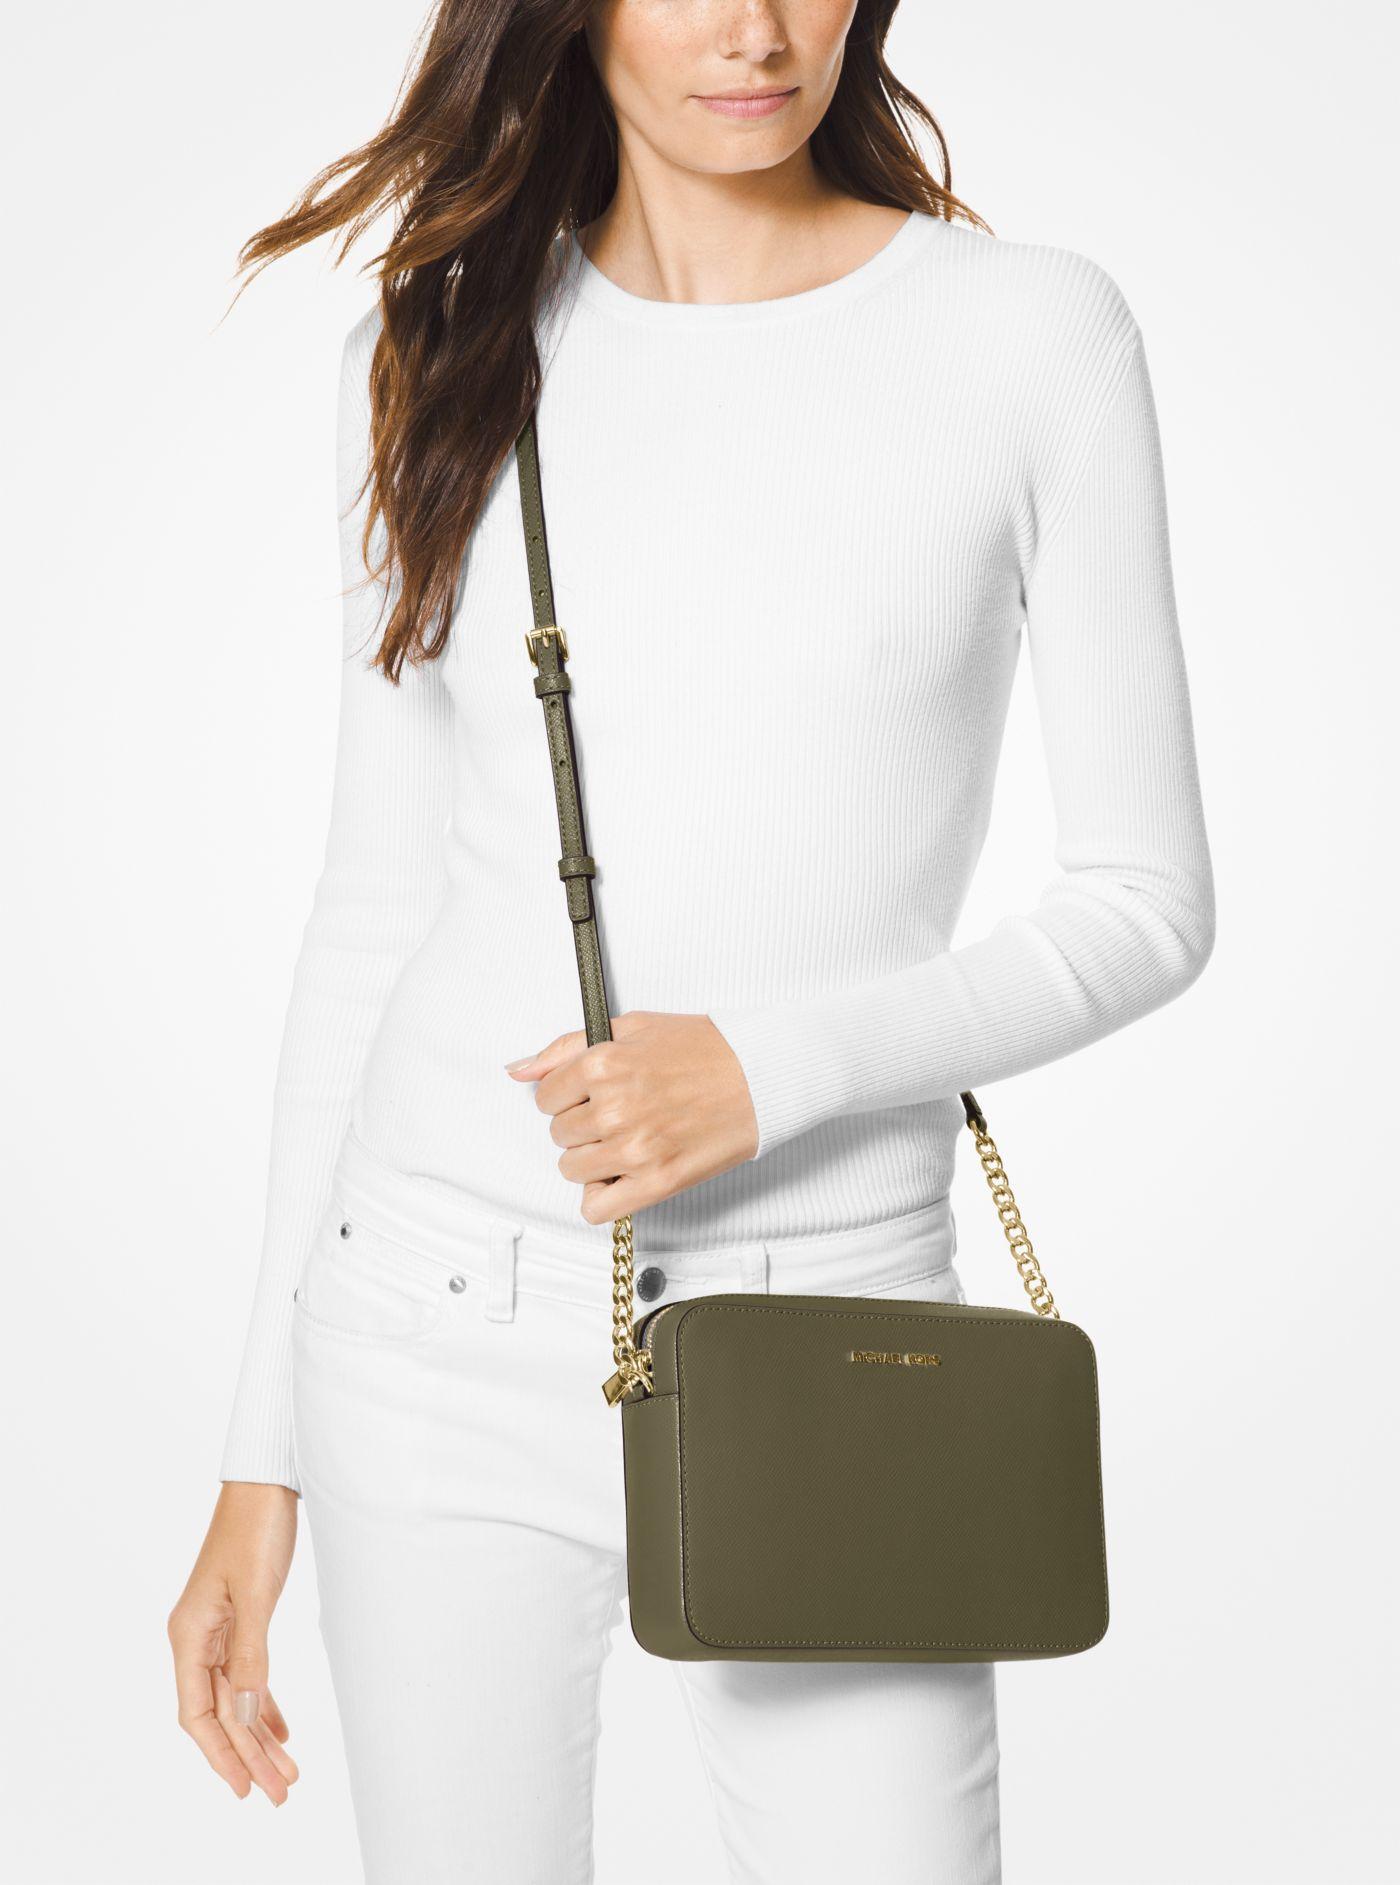 Michael Kors Jet Set Large Saffiano Leather Crossbody Bag in Olive (Green)  | Lyst